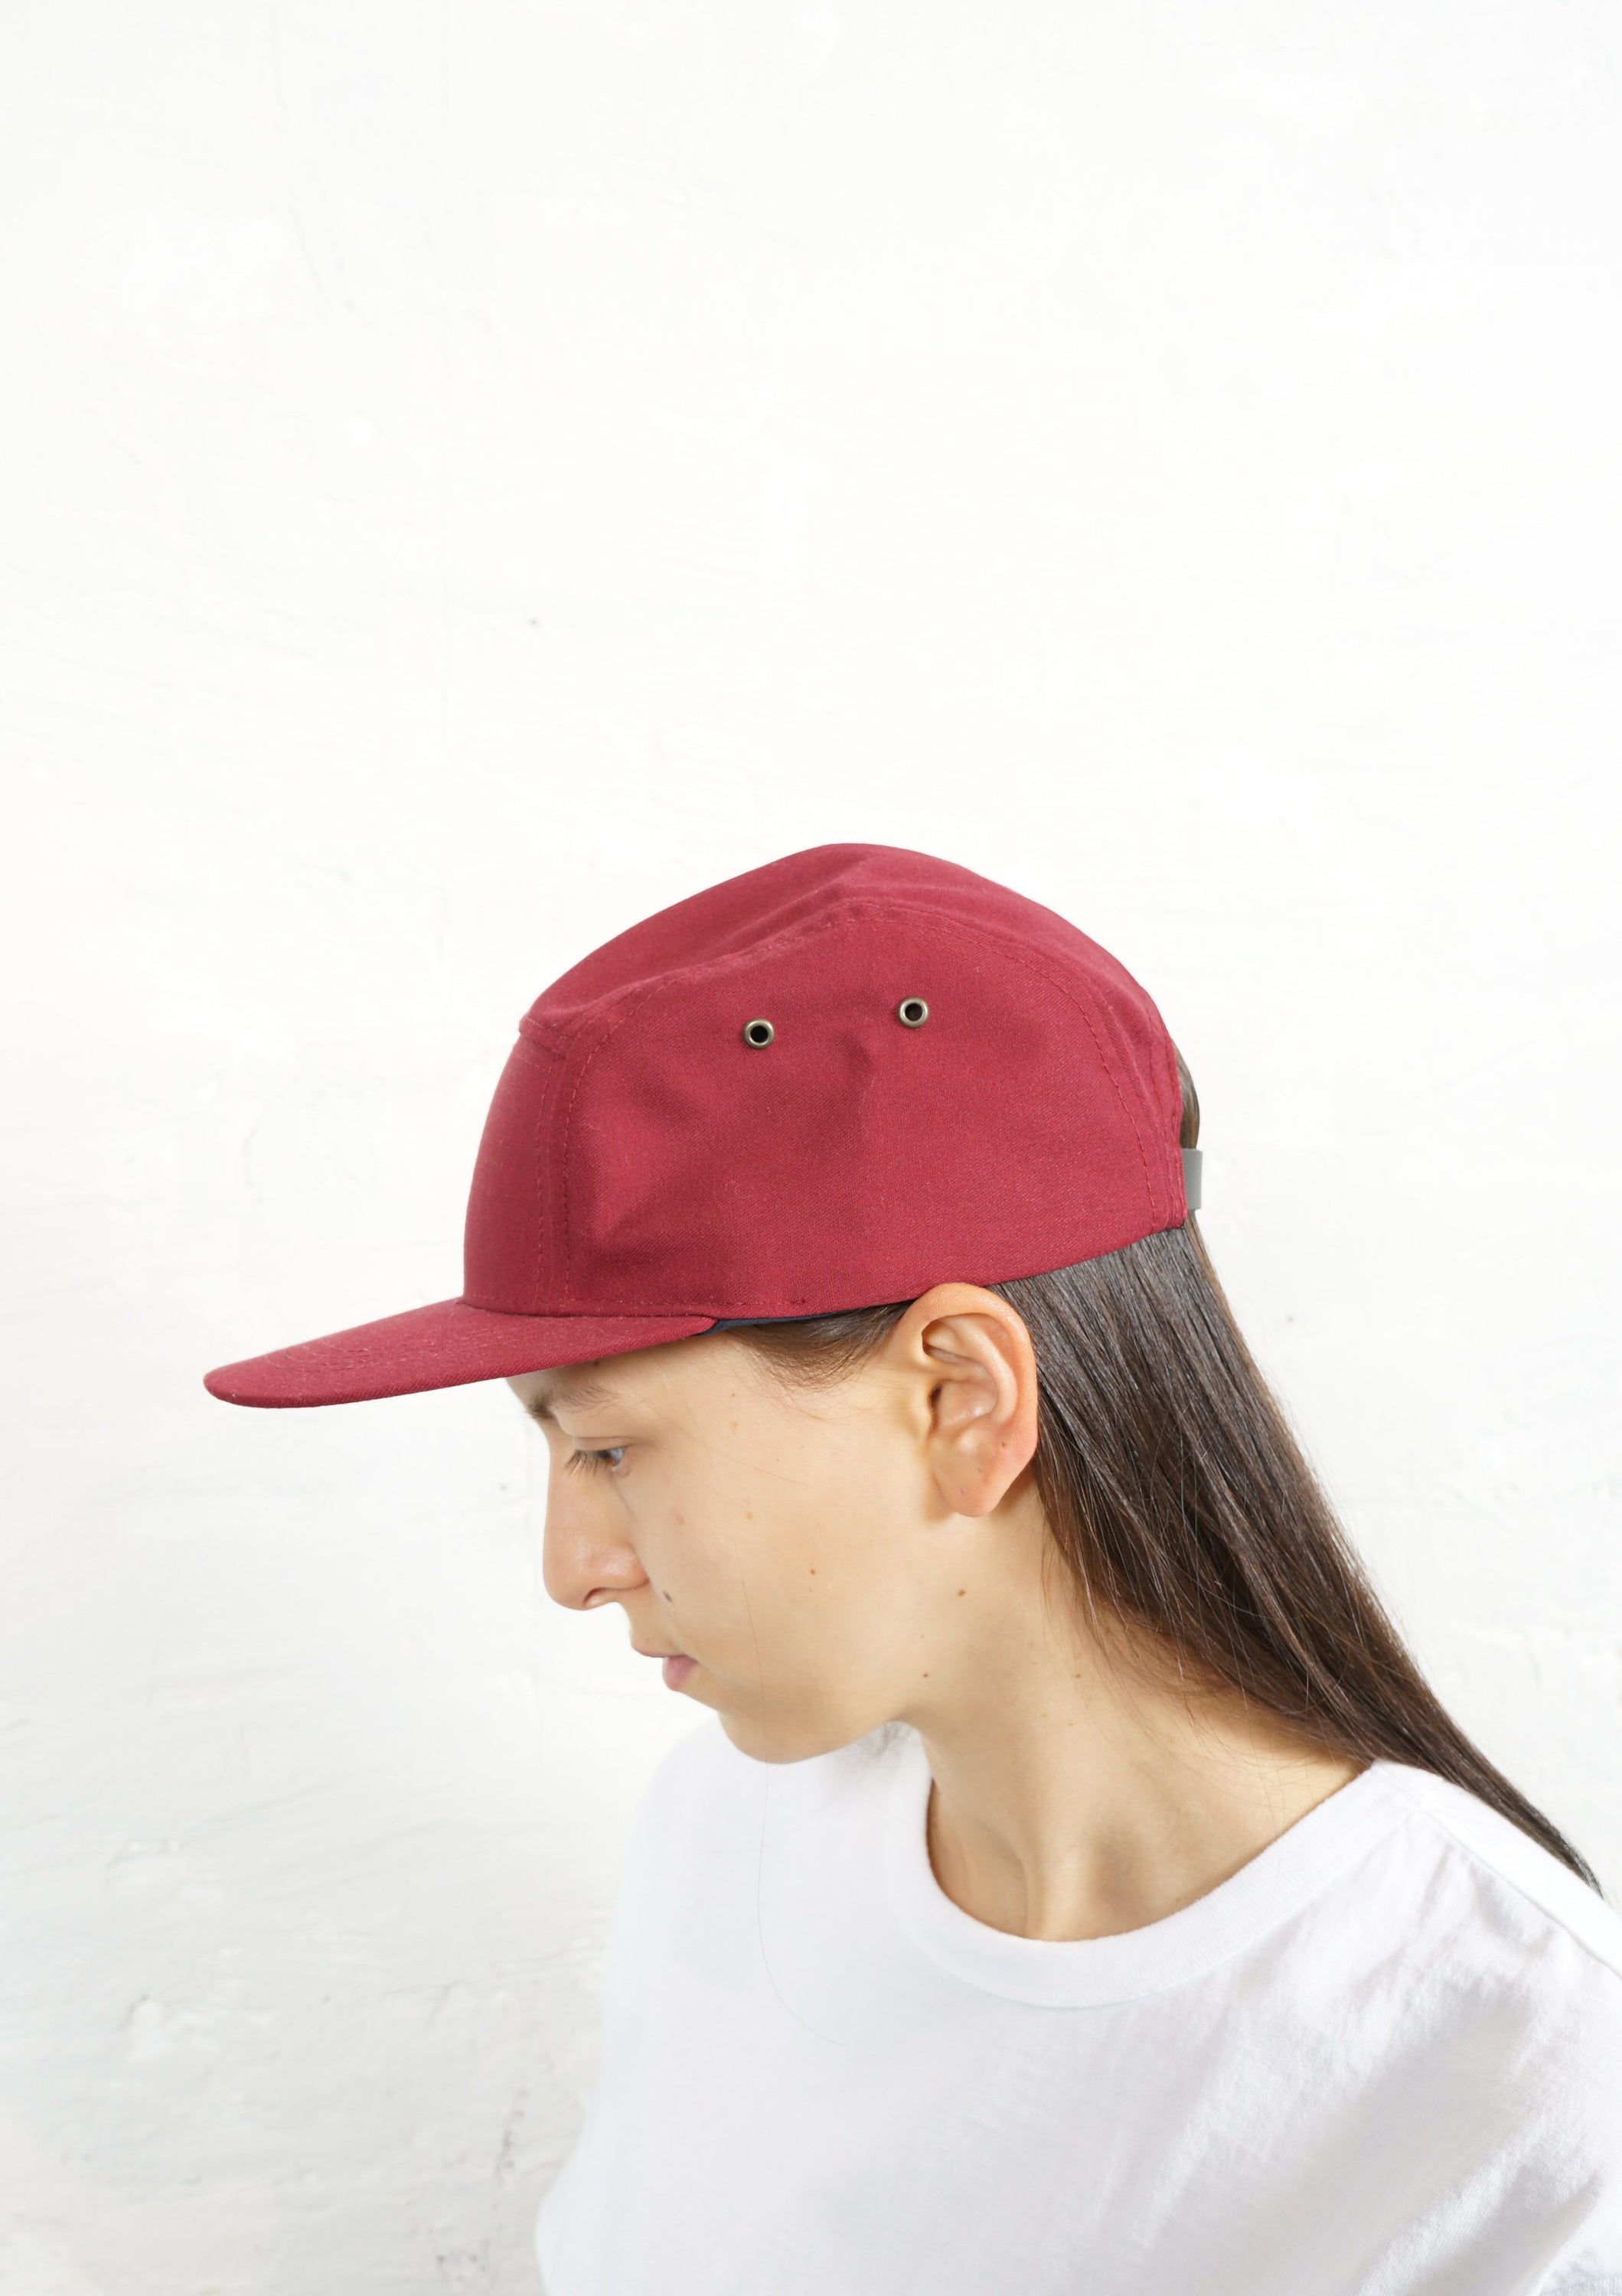 5-Panel Cap Made in USA Burgundy